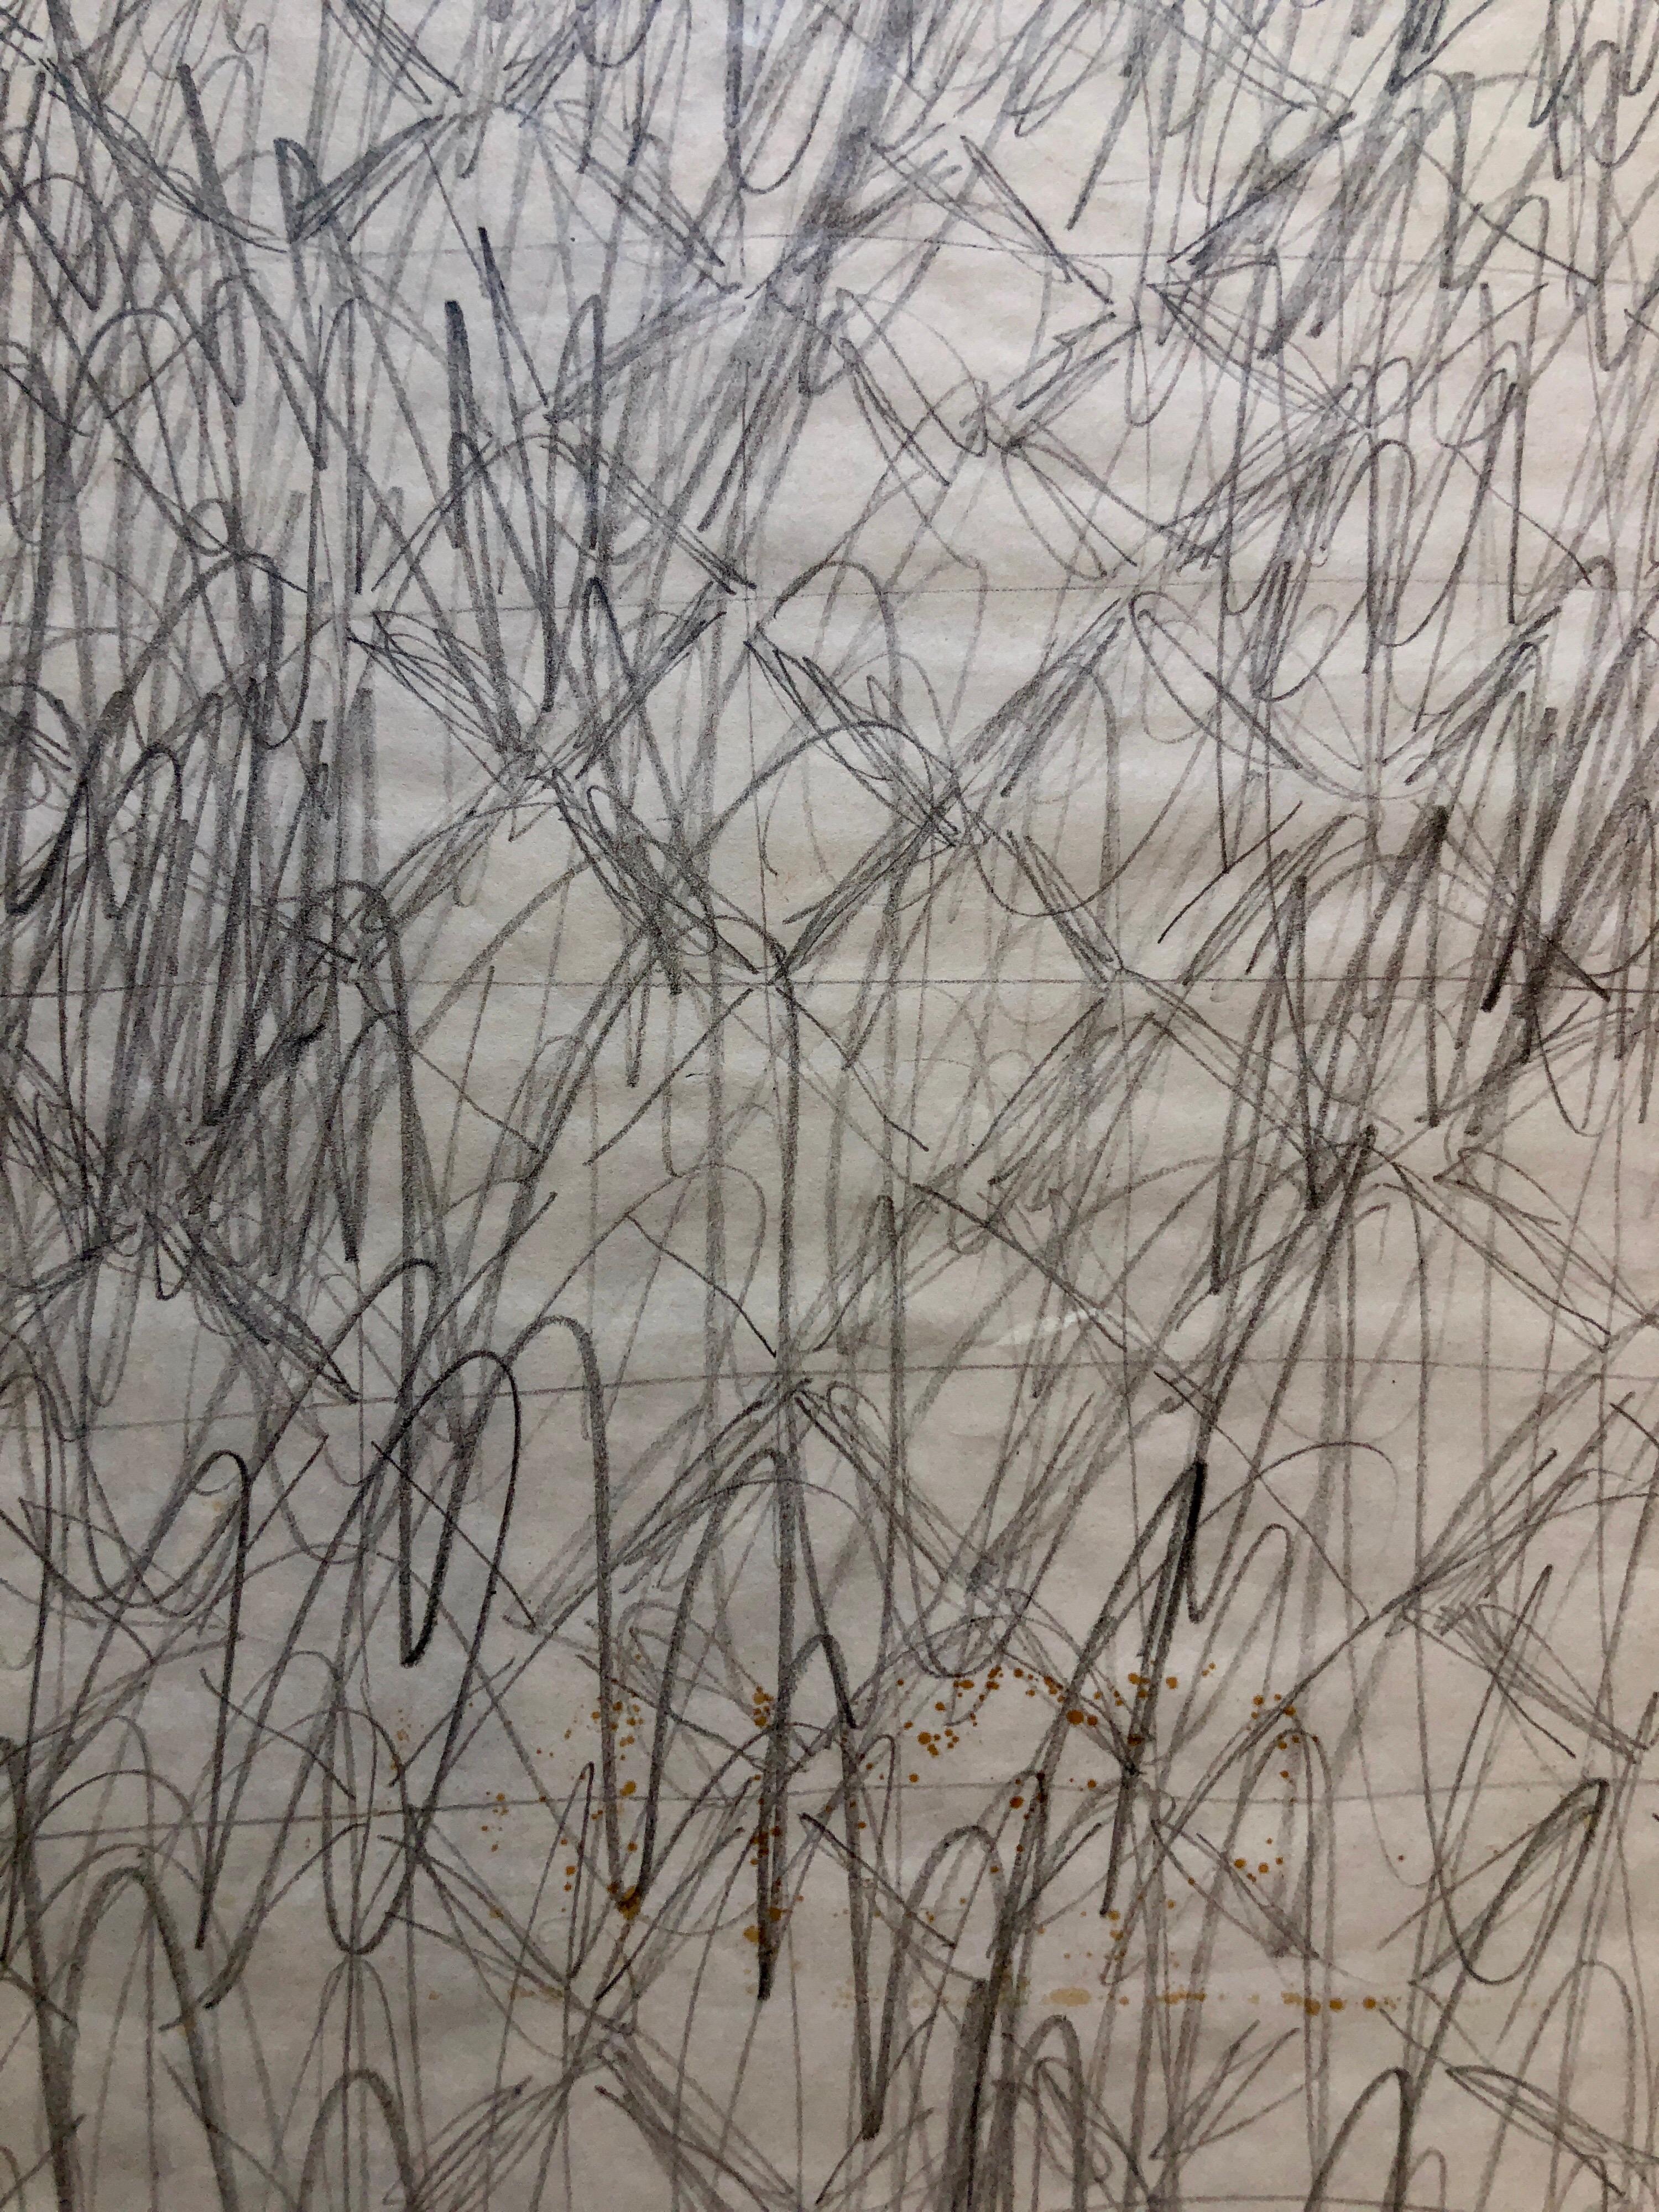 Abstract Expressionist Pencil Drawing Katherine Porter 1